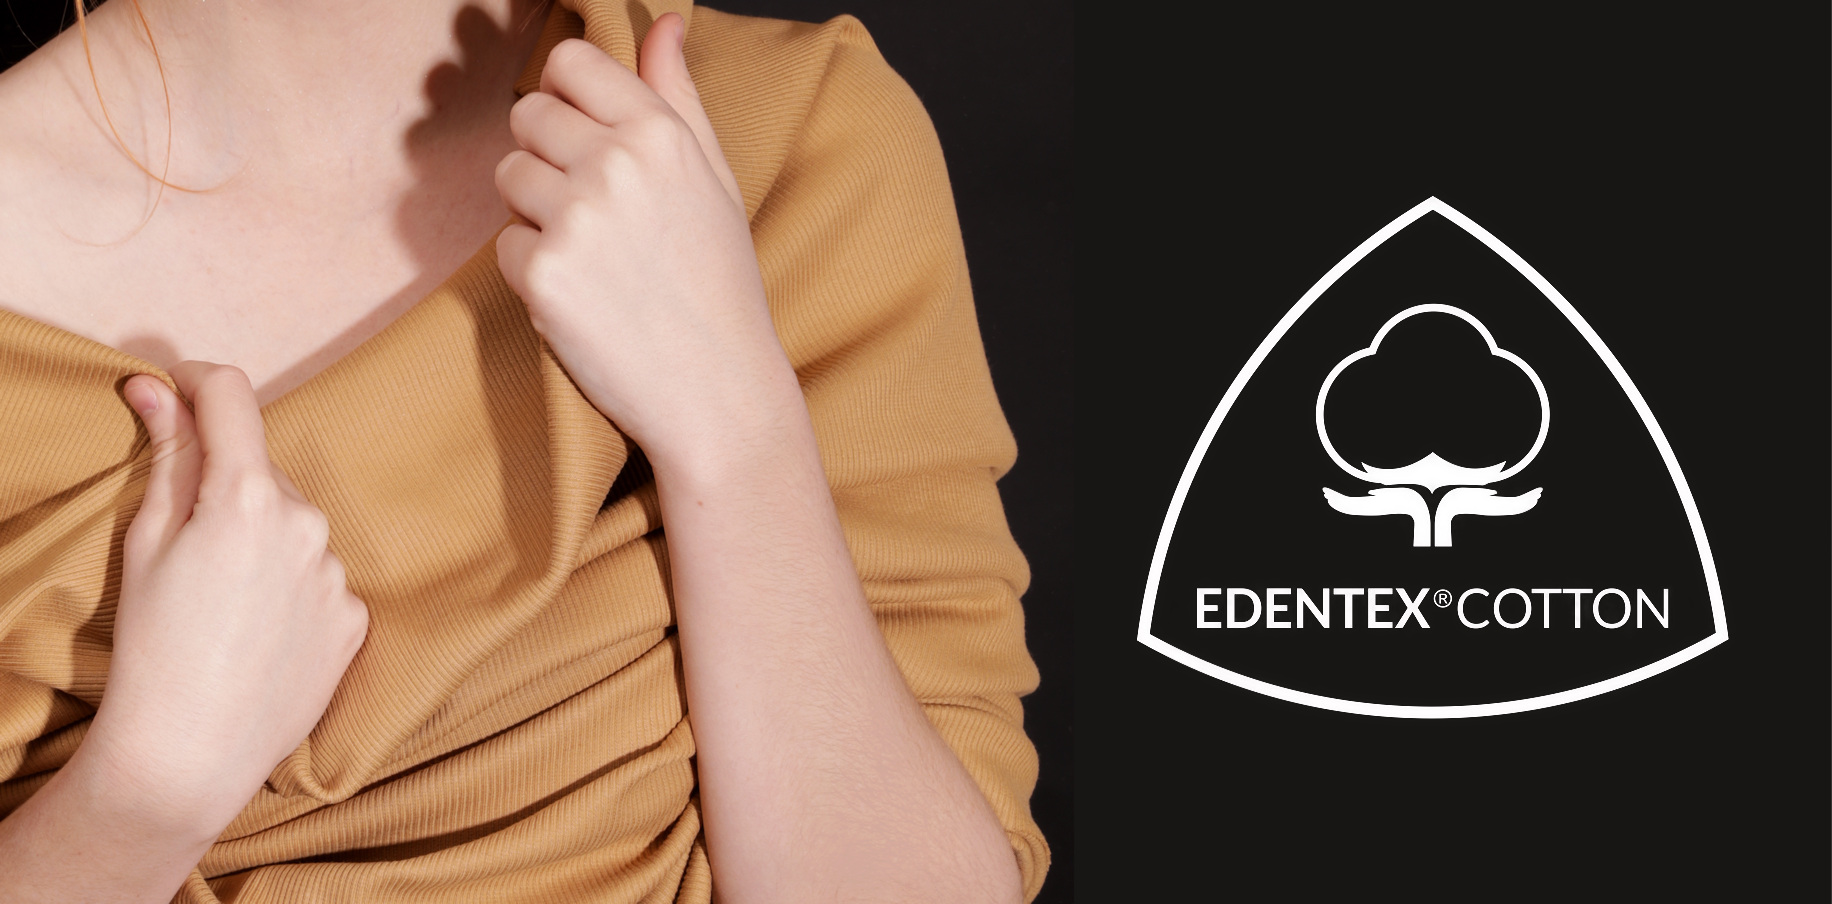 EDENTEX® is the value in every detail. Timeless beauty, love and elegance, softness and strength in one 